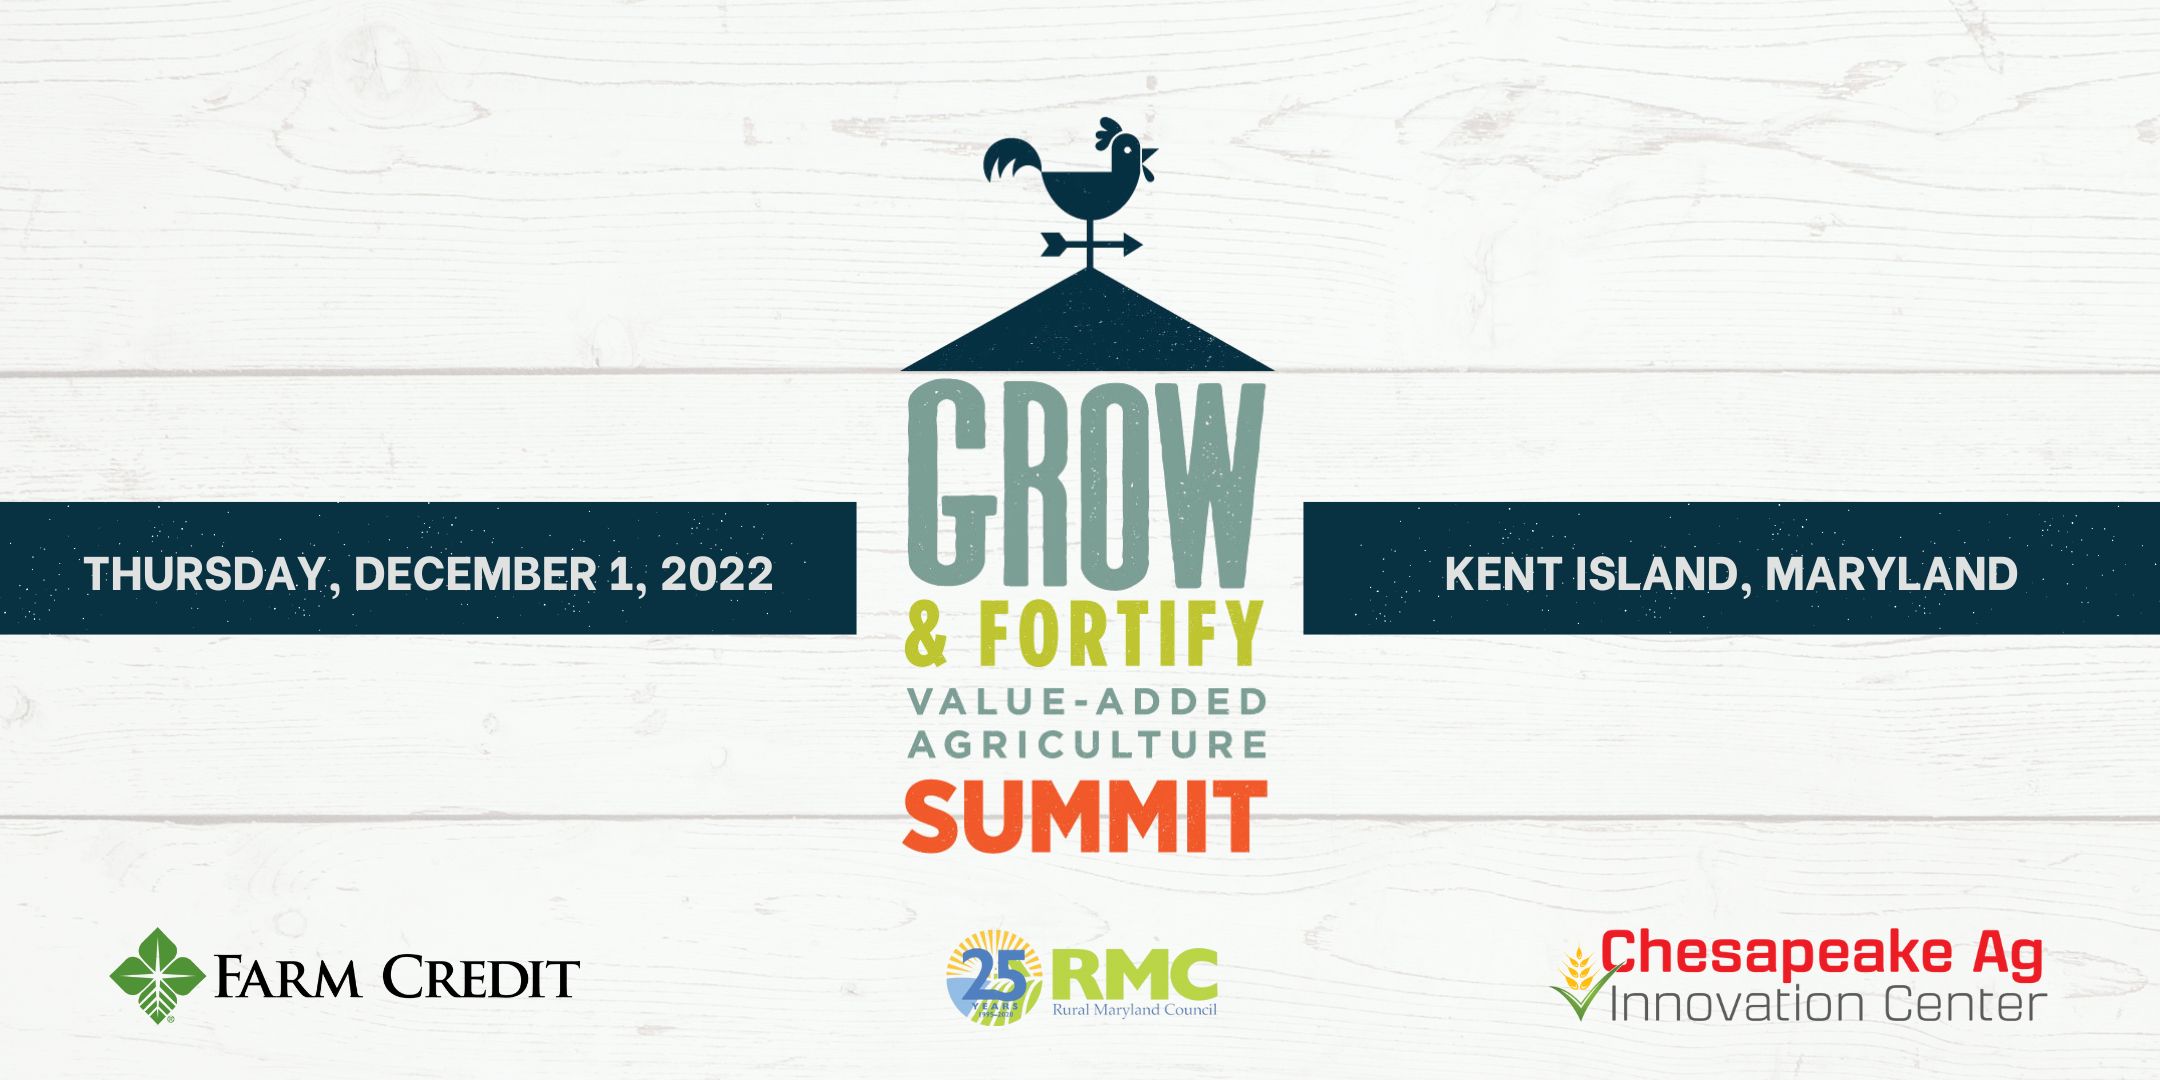 2022 Cultivate & Craft Summit header. The header includes the event logo and logos for our conference partners, Farm Credit, Rural Maryland Council and the Chesapeake Ag Innovation Center.